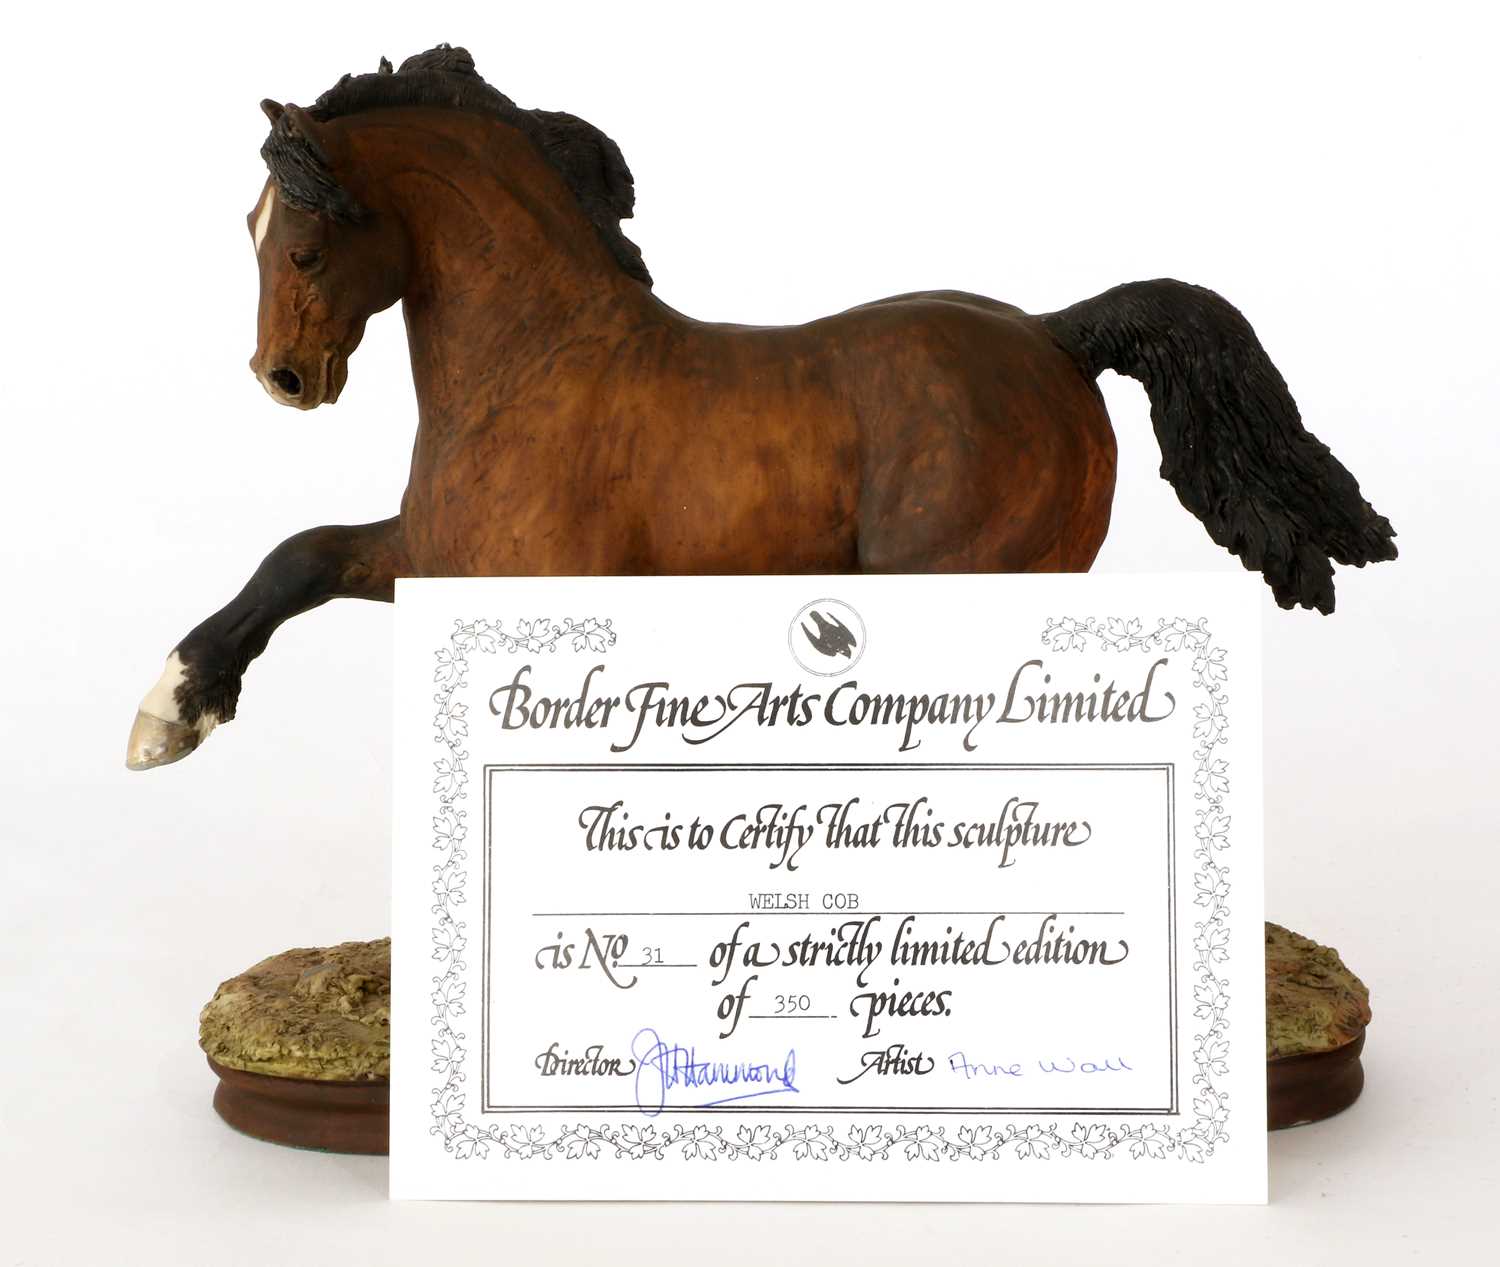 Border Fine Arts 'Welsh Cob' (Style One), model No. L11A by Anne Wall, limited edition 31/350, - Image 2 of 6